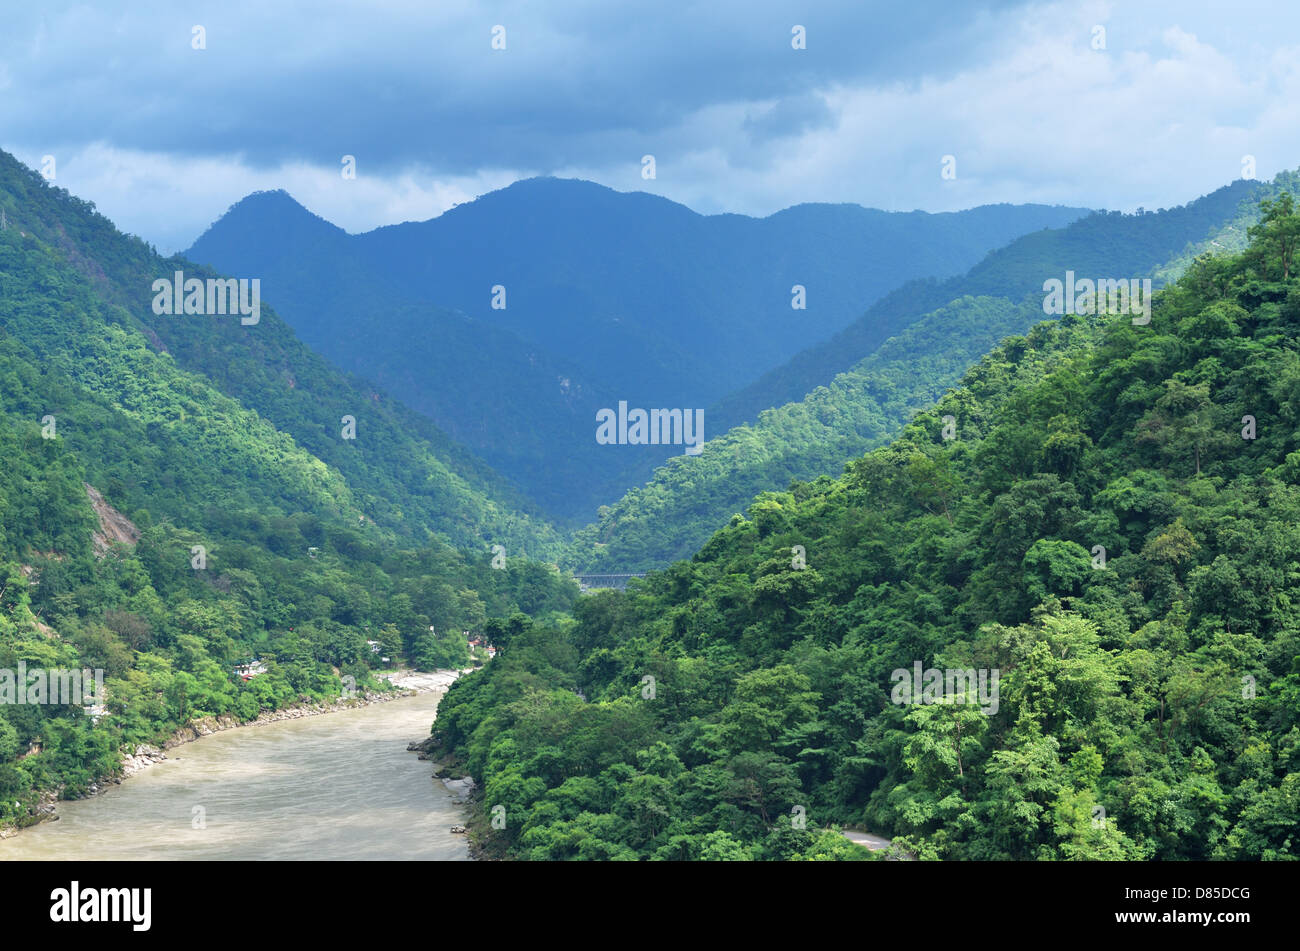 Ganges River flowing between Rishikesh hills, India - Aug 2012 Stock Photo